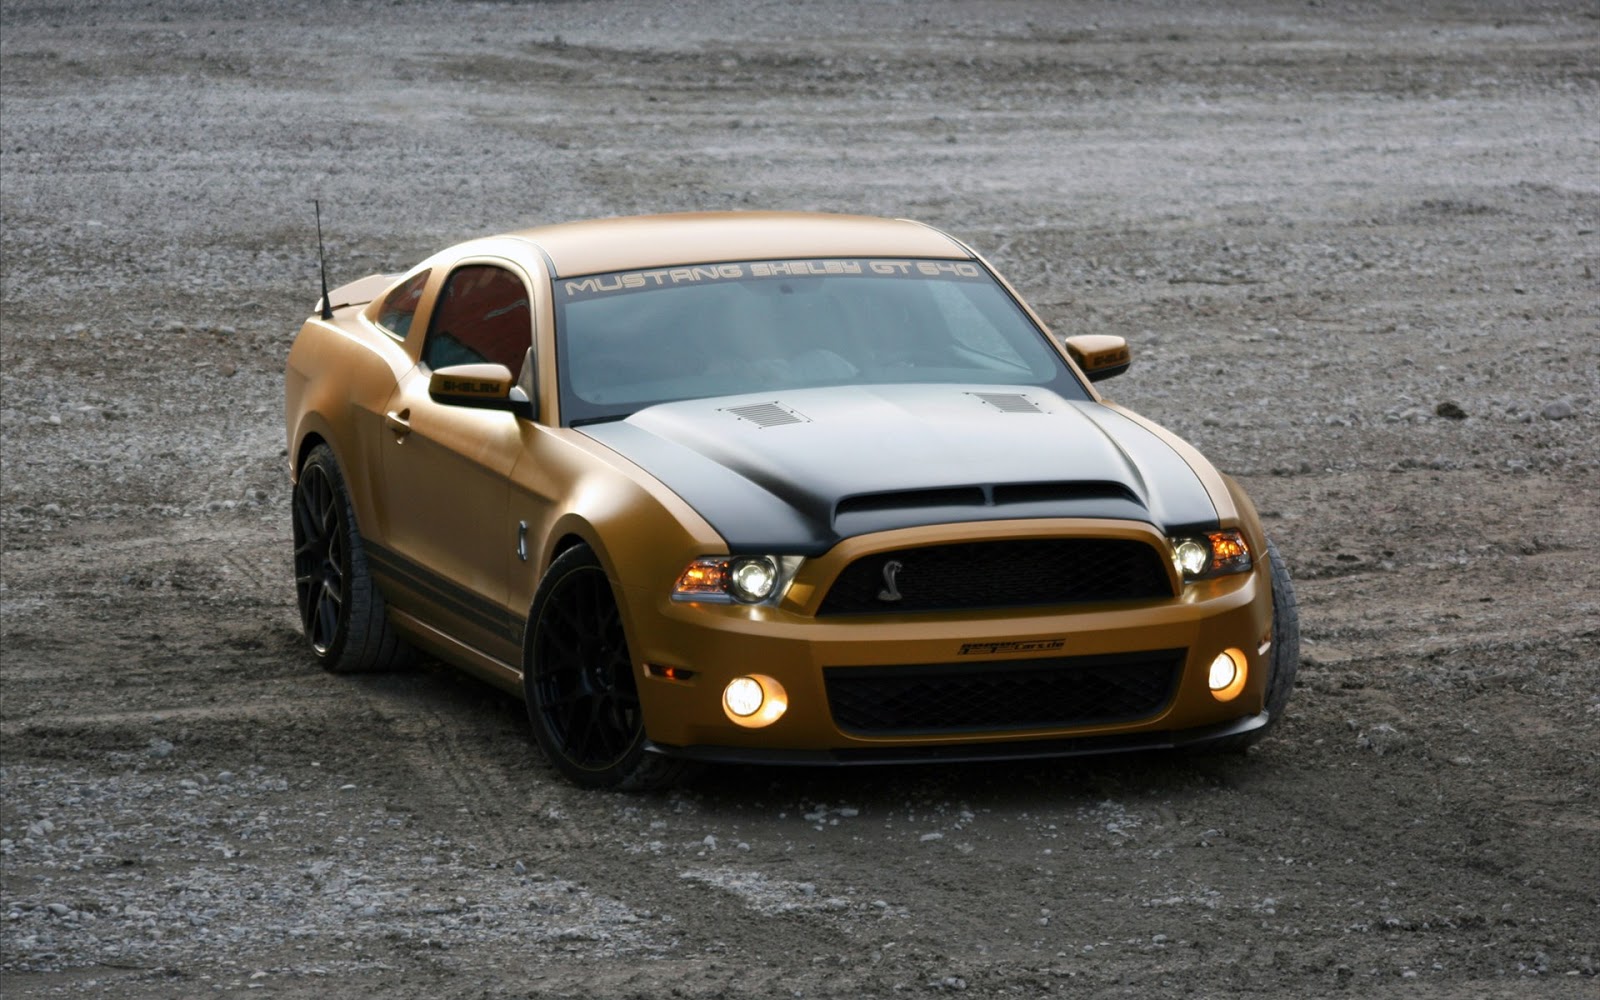 Awesome cars hd wallpapers full hd Wallpapers